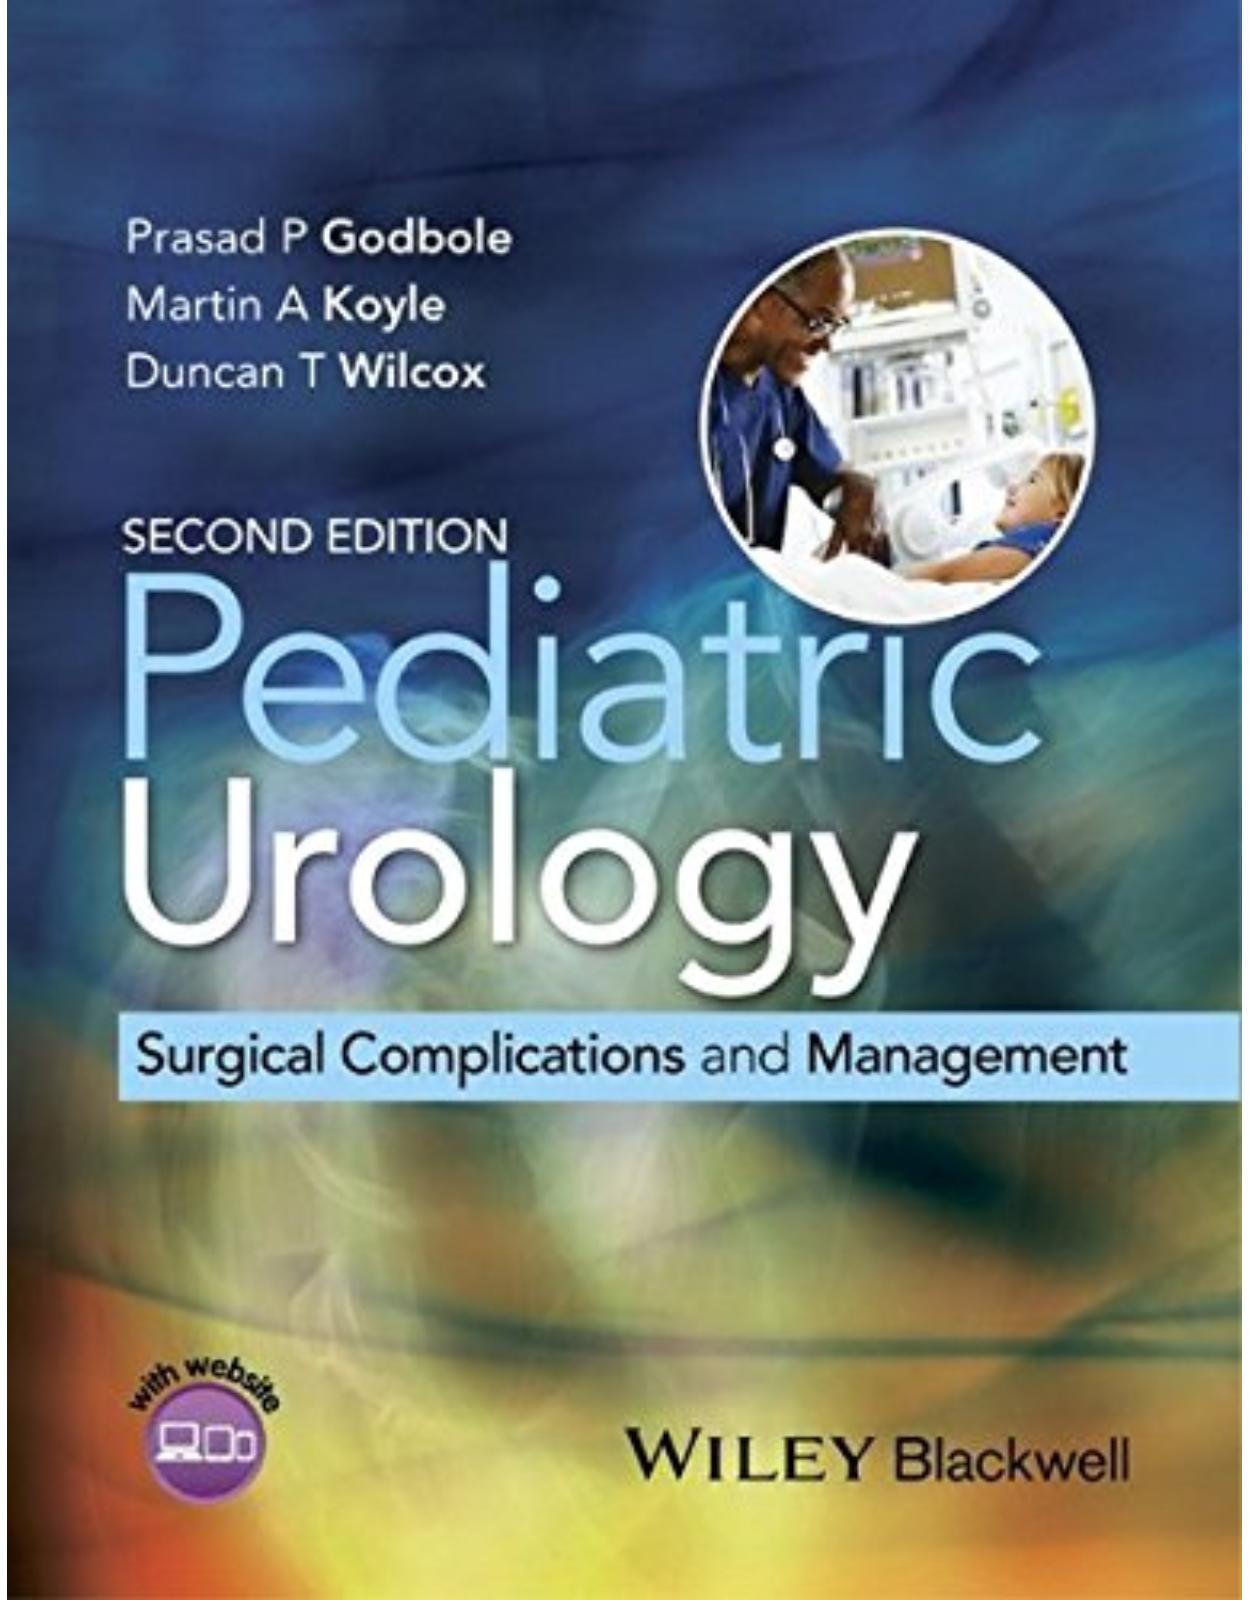 Pediatric Urology: Surgical Complications and Management, 2nd Edition